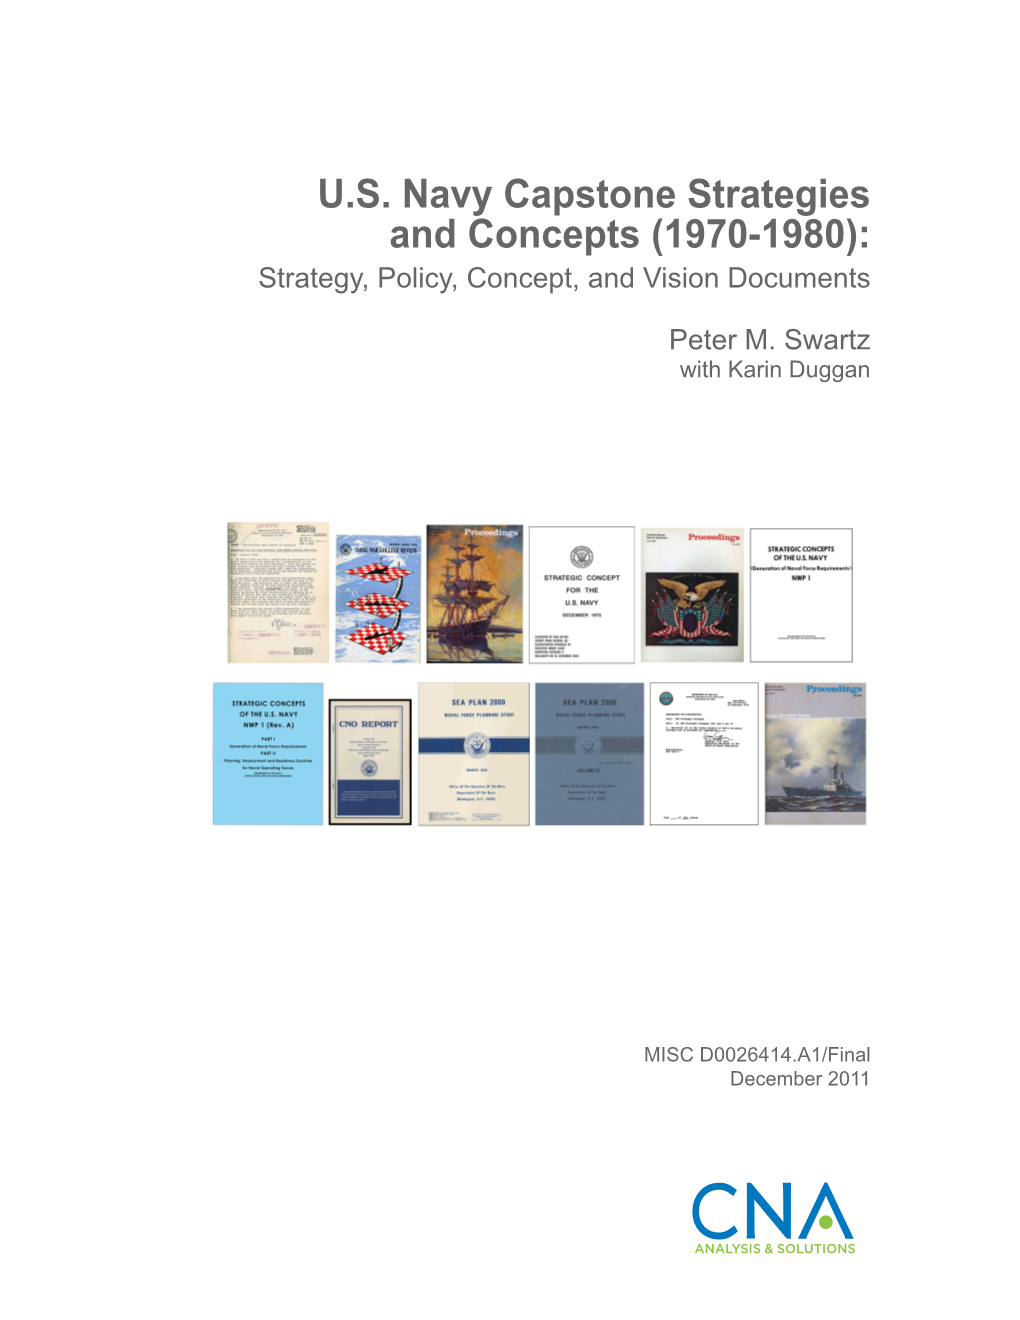 US Navy Capstone Strategies and Concepts